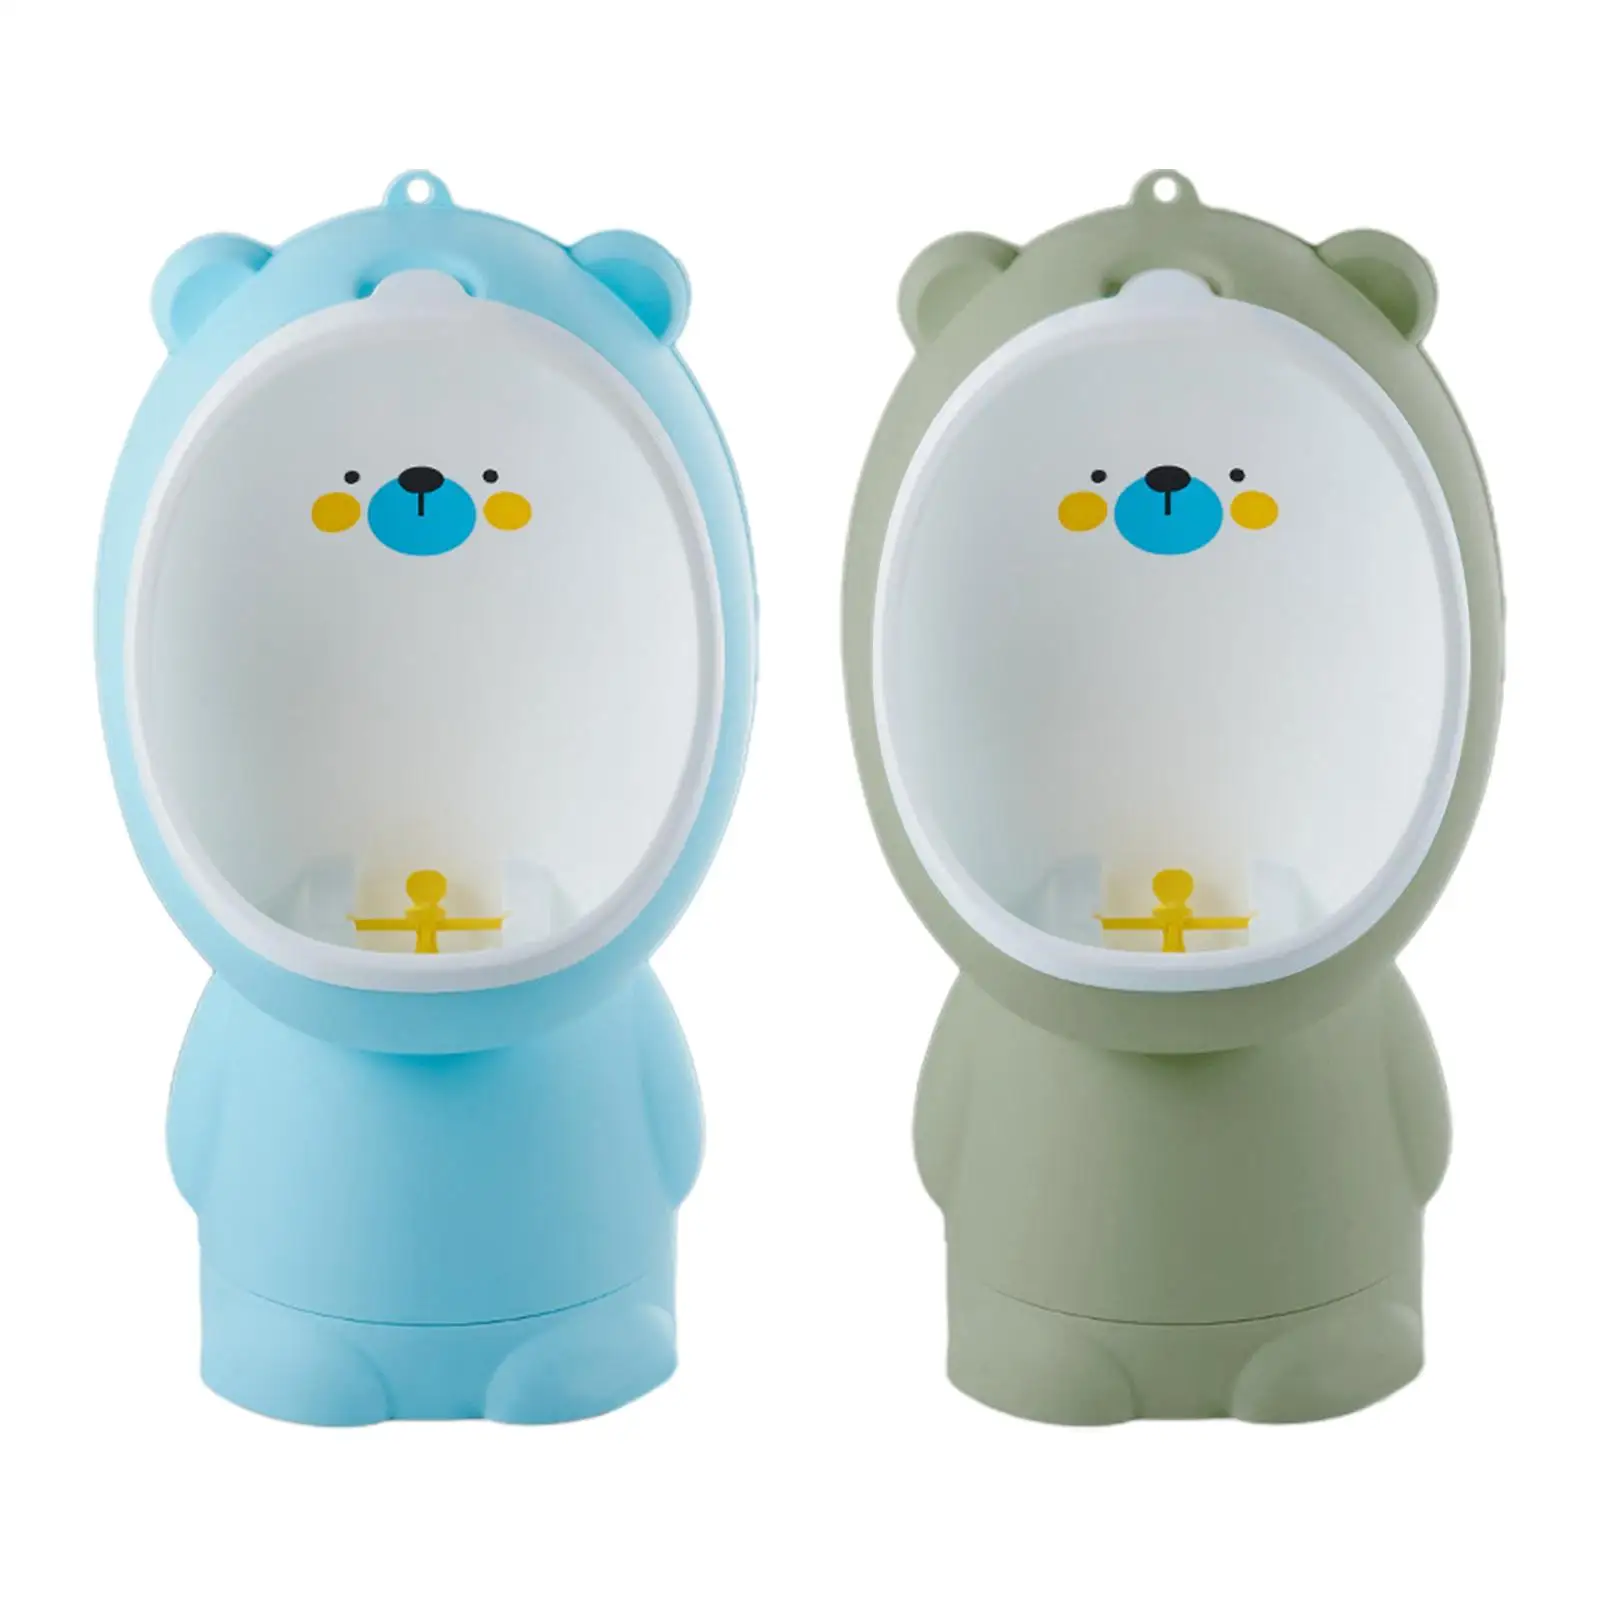 Standing Potty Urinal Adjustable Height Hanging Pee Trainer Wall Mounted Potty Trainer Urinal for Kids Baby Child Toddlers Boys